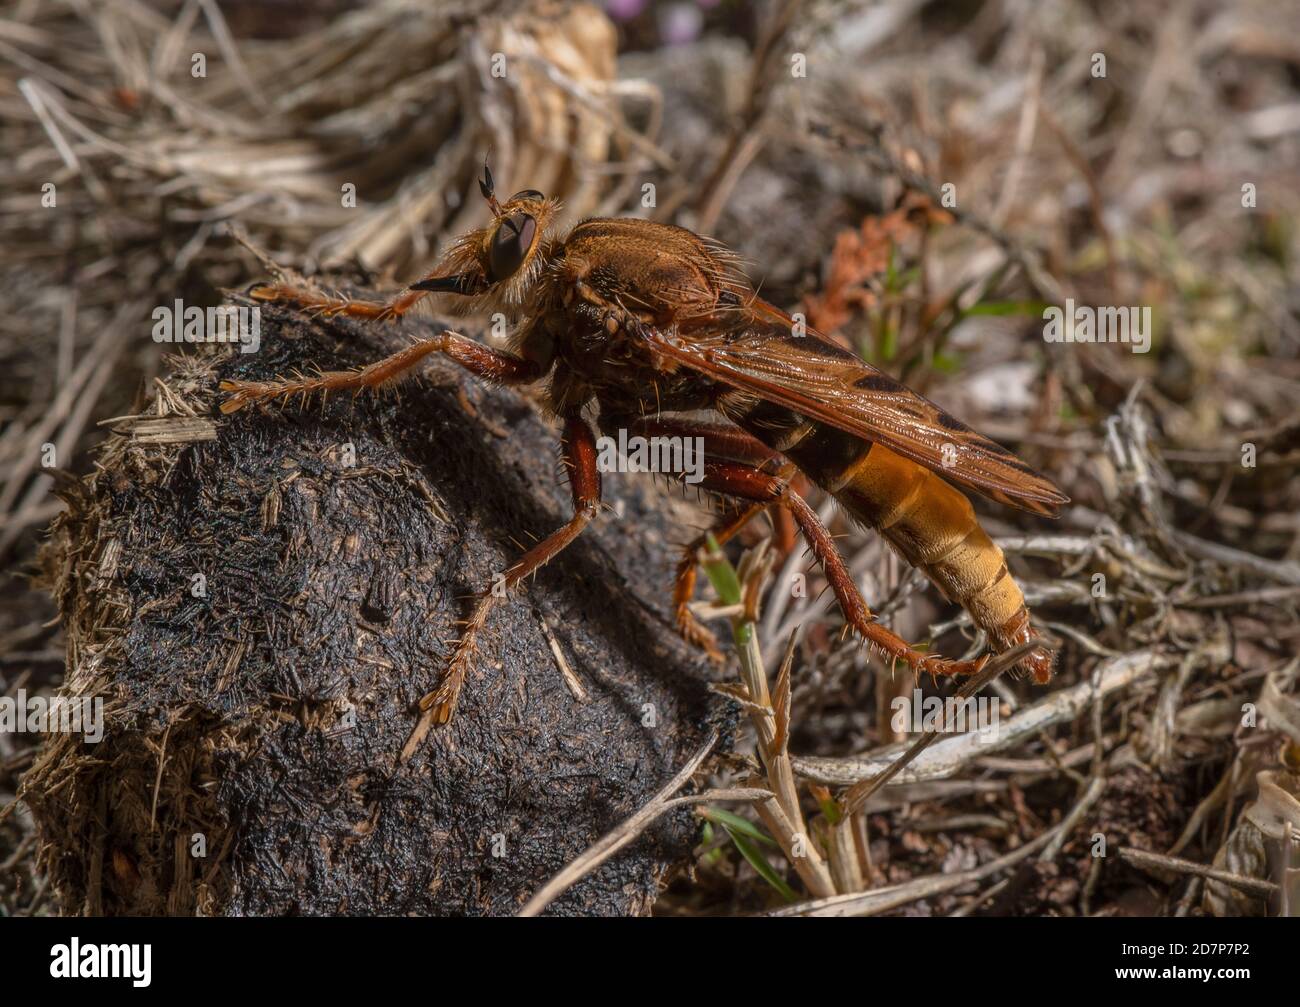 Hornet robberfly, Asilus crabroniformis, perched on pony dung in grassy heathland, Dorset. Stock Photo